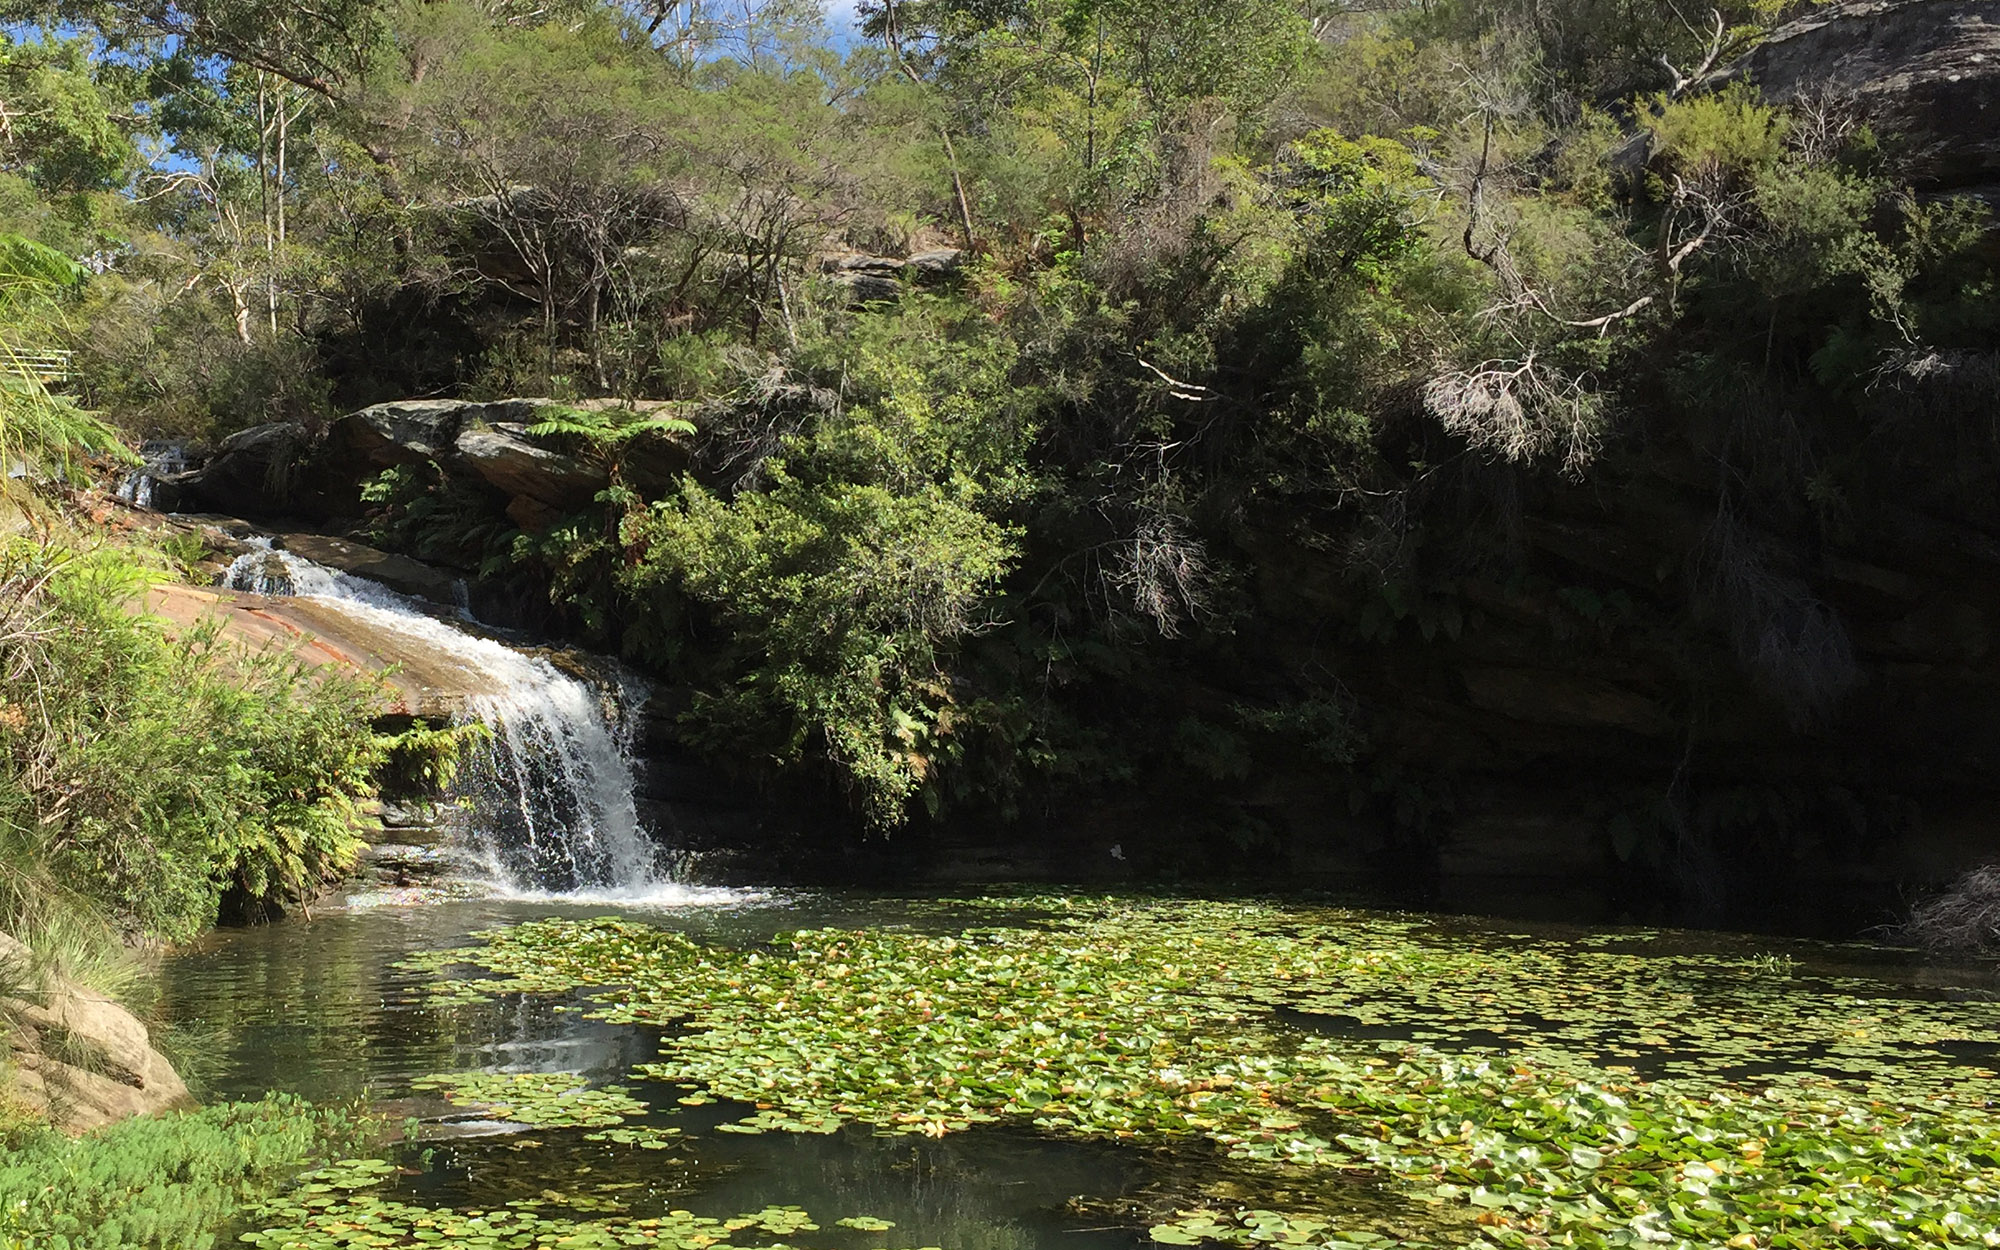 Waterfall and pool at Aboriginal cultural site - Manly Vale-Gayamaygal NSW. 